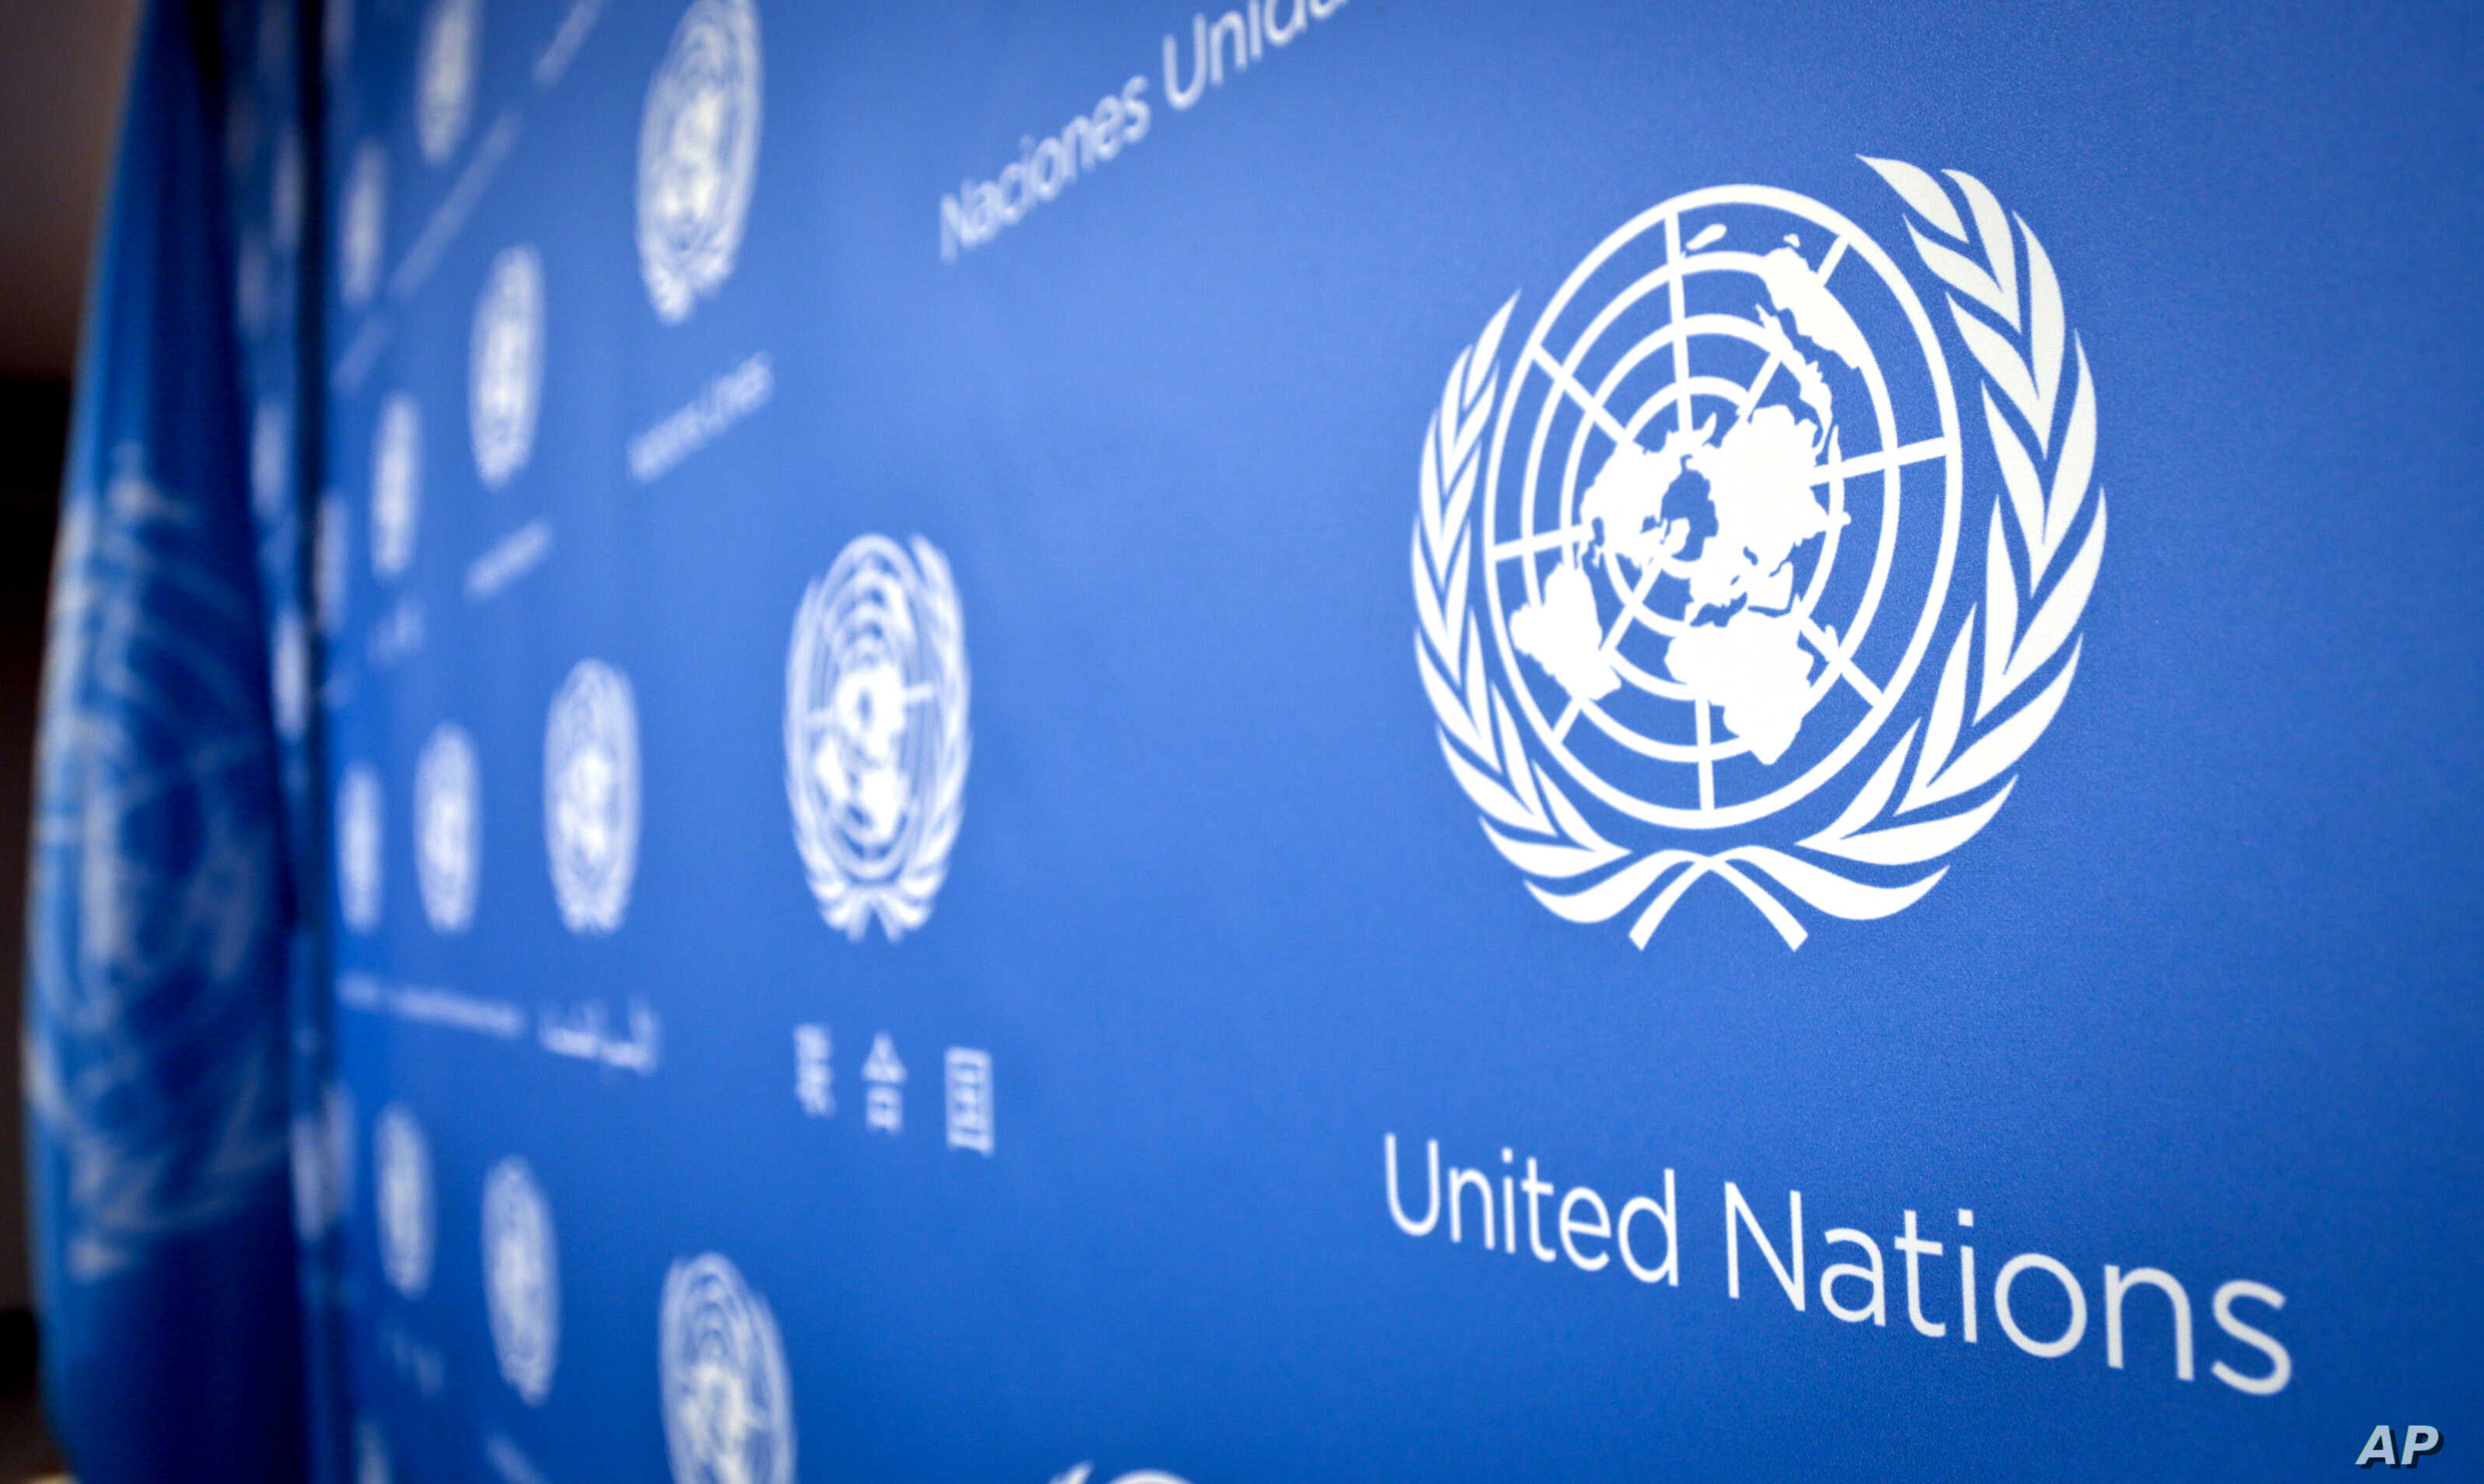 U.N. logo pattern a press conference background at the United Nations headquarters, Tuesday, Sept. 3, 2013.   (AP Photo/Bebeto Matthews)